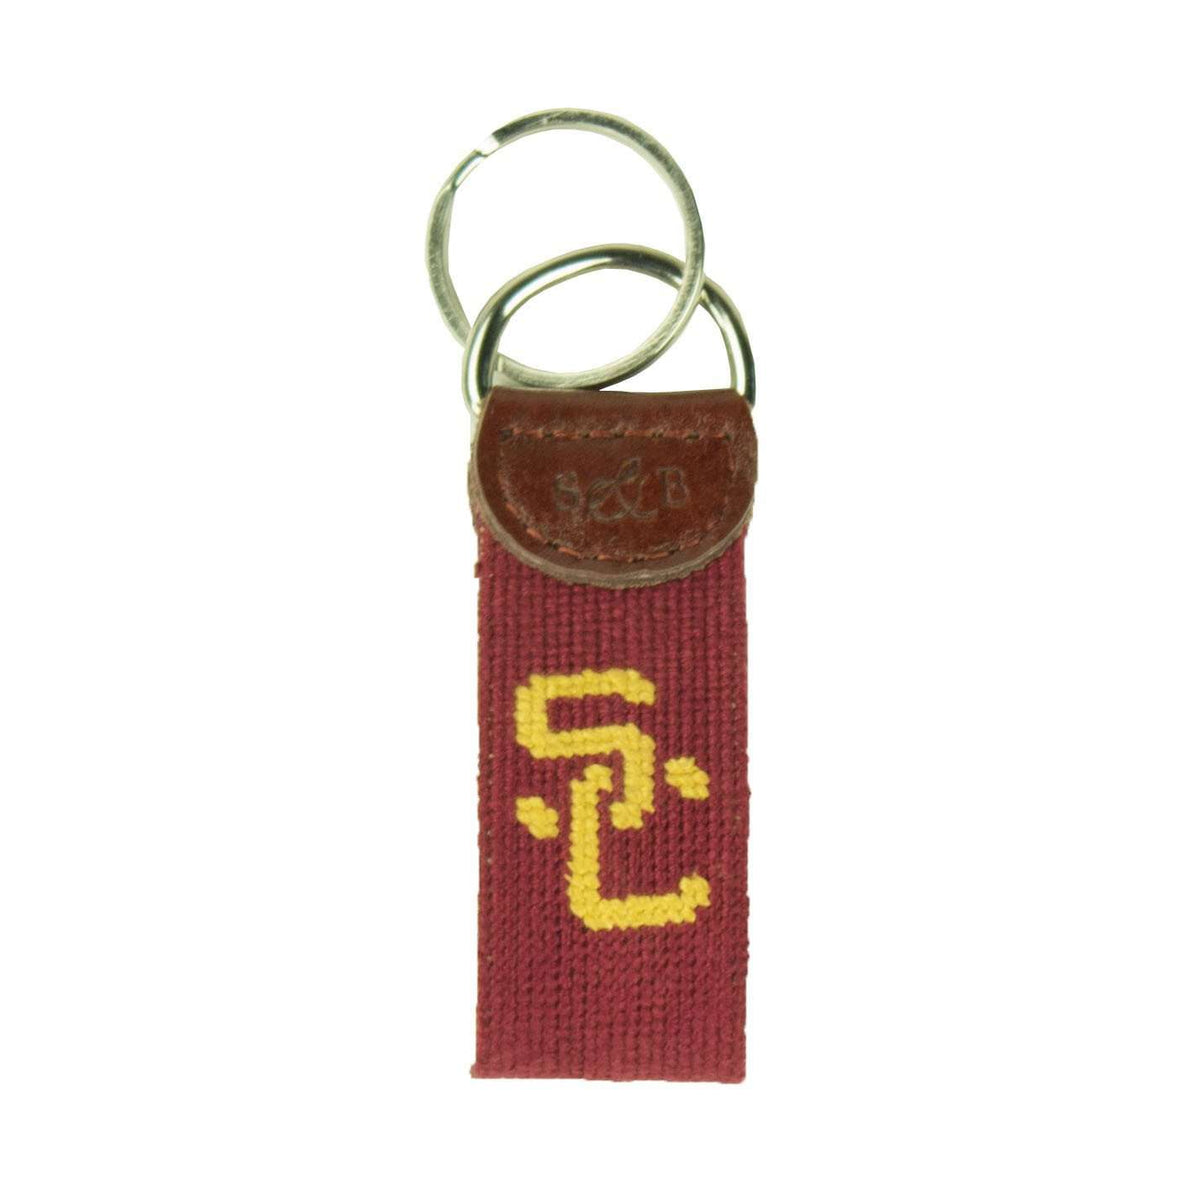 University of Southern California Needlepoint Key Fob in Crimson by Smathers & Branson - Country Club Prep